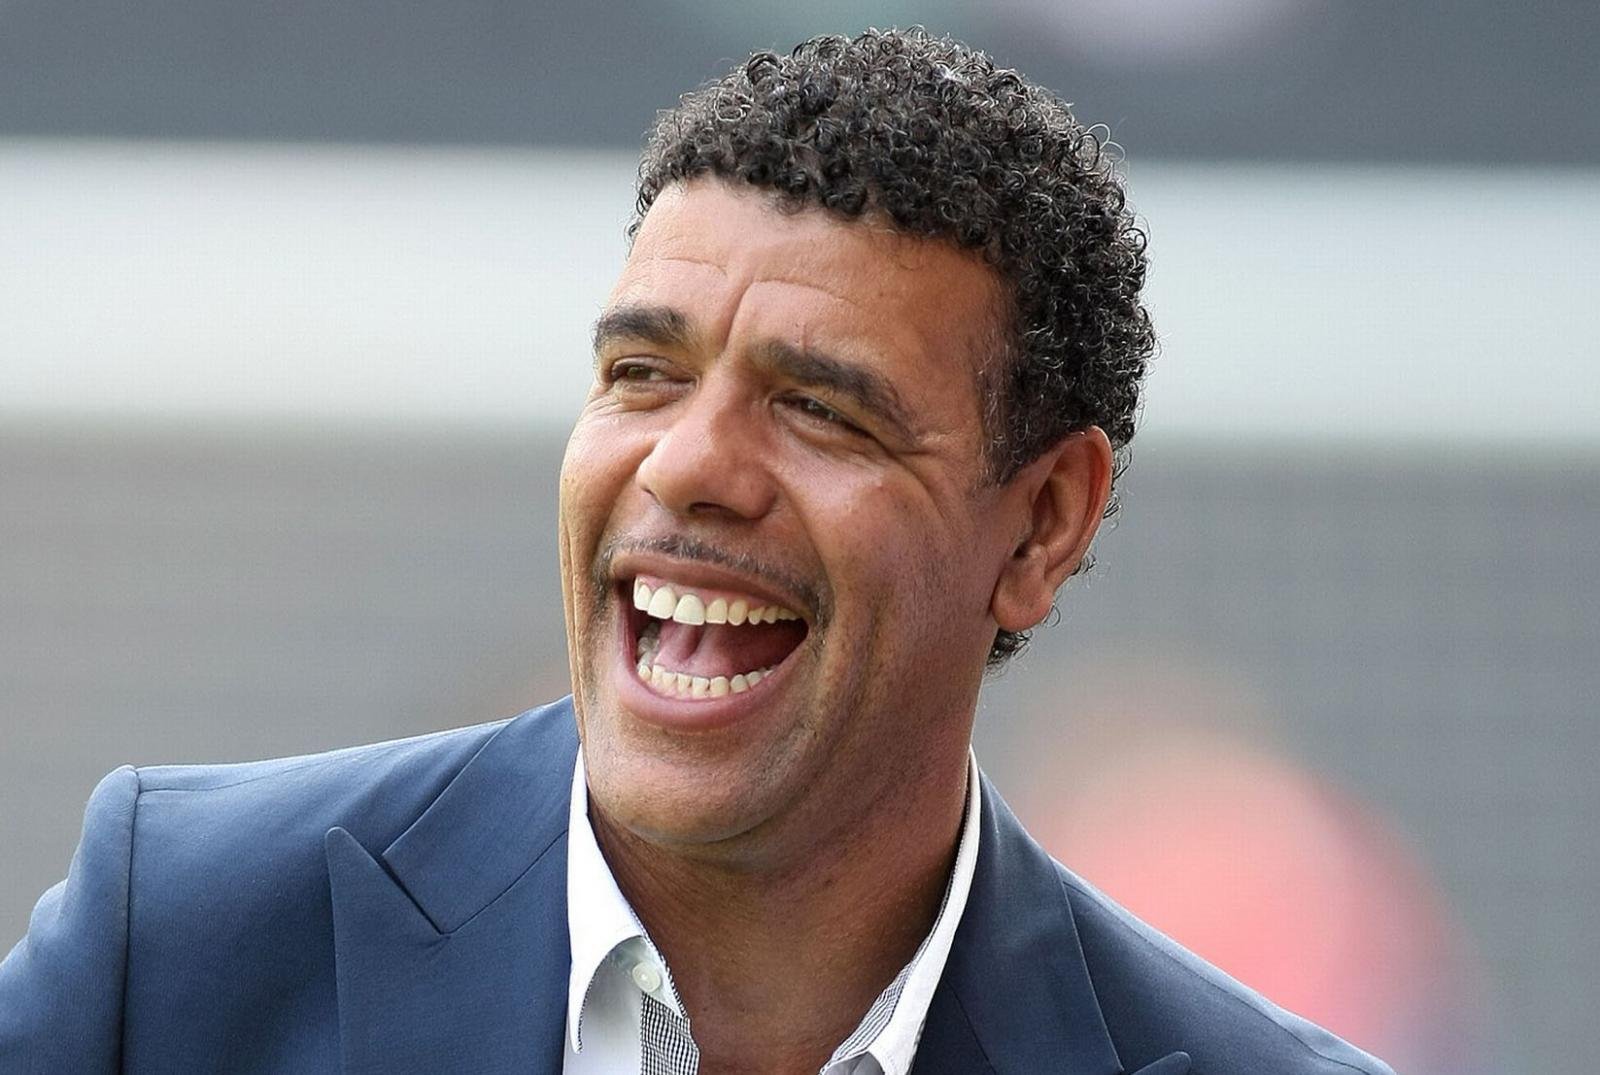 Did You Know? 5 facts about Sky Sports funnyman Chris Kamara